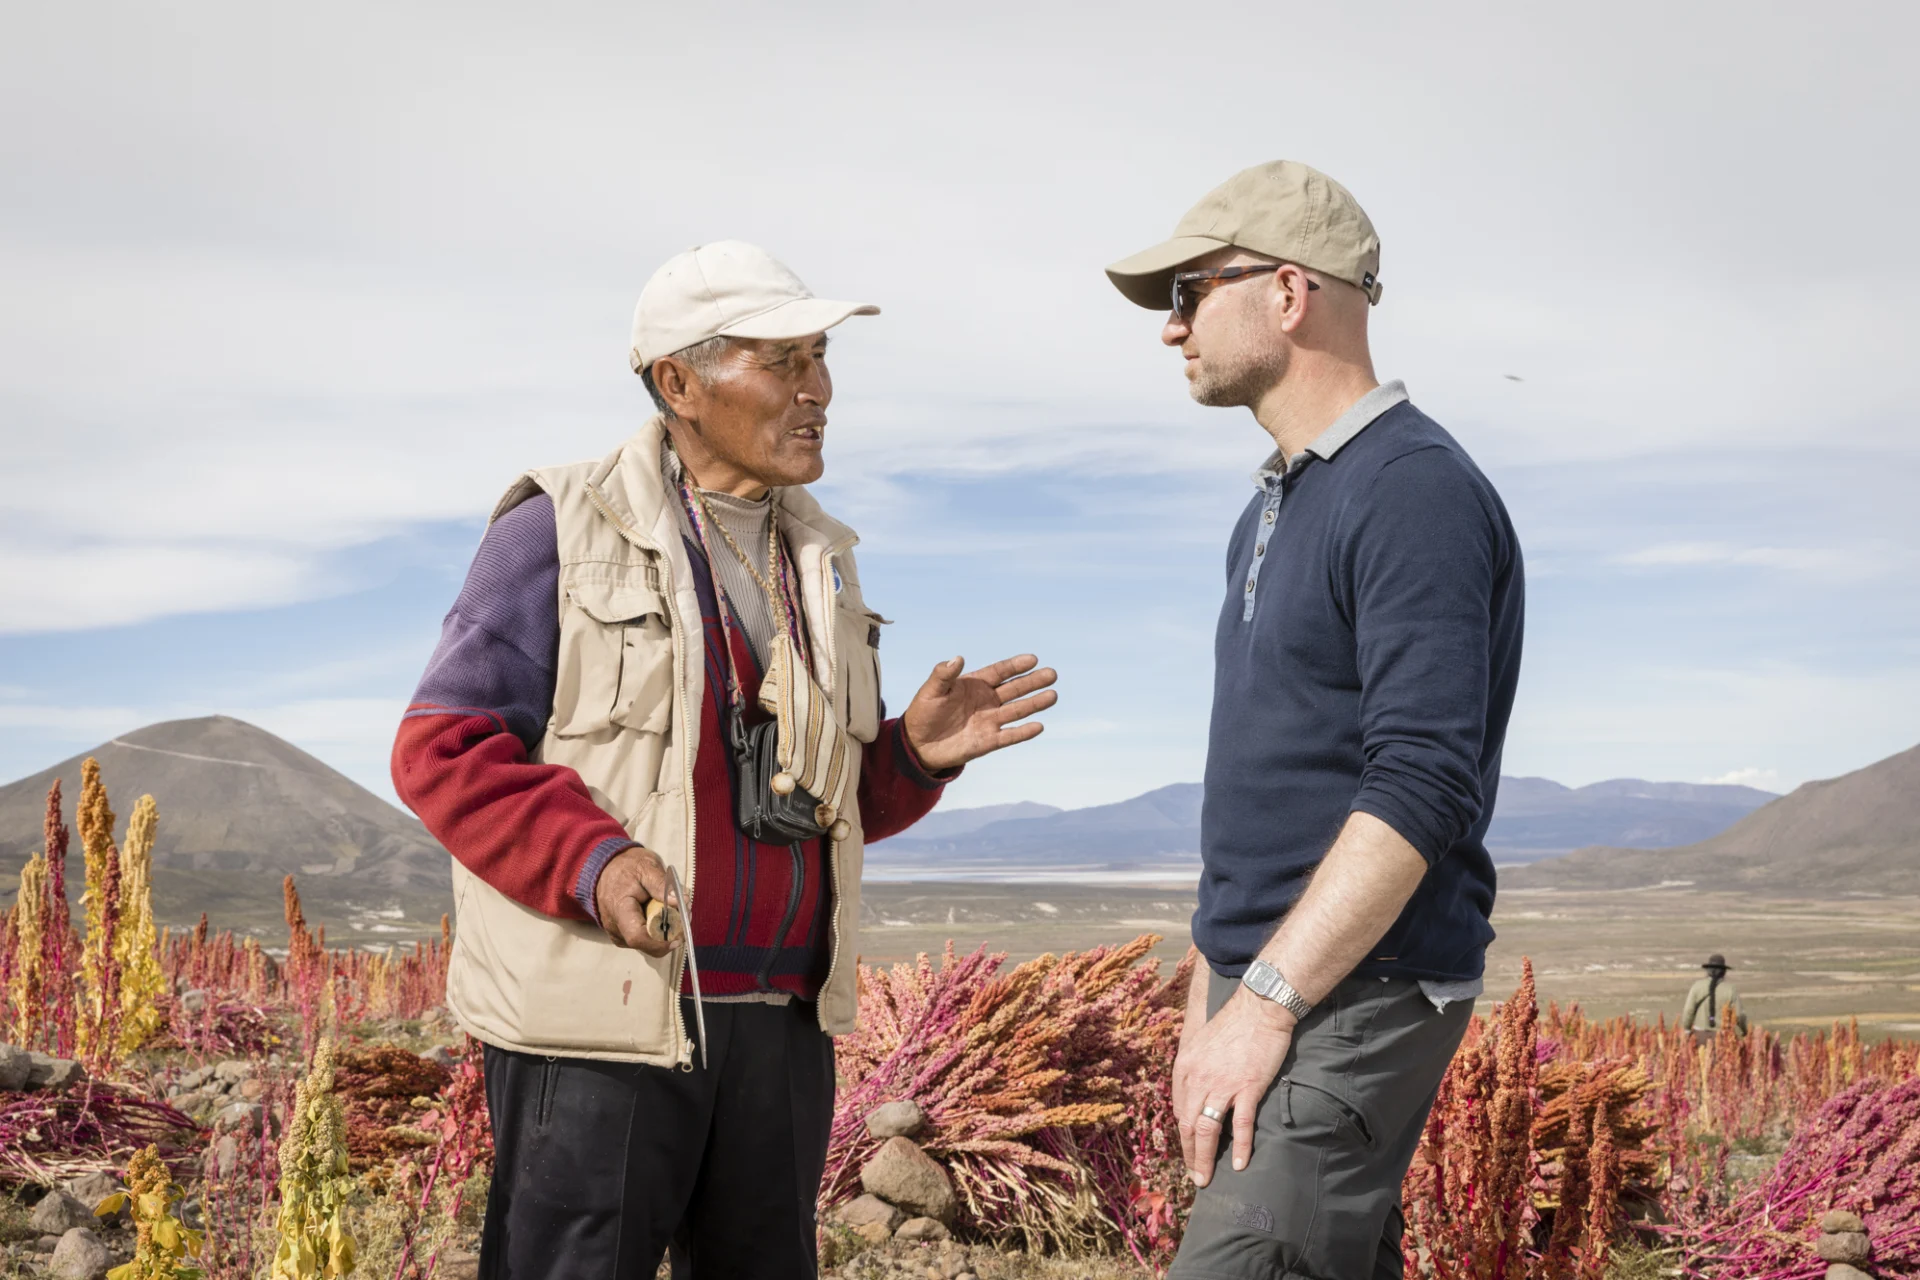 Two men talk in front of a quinoa field.